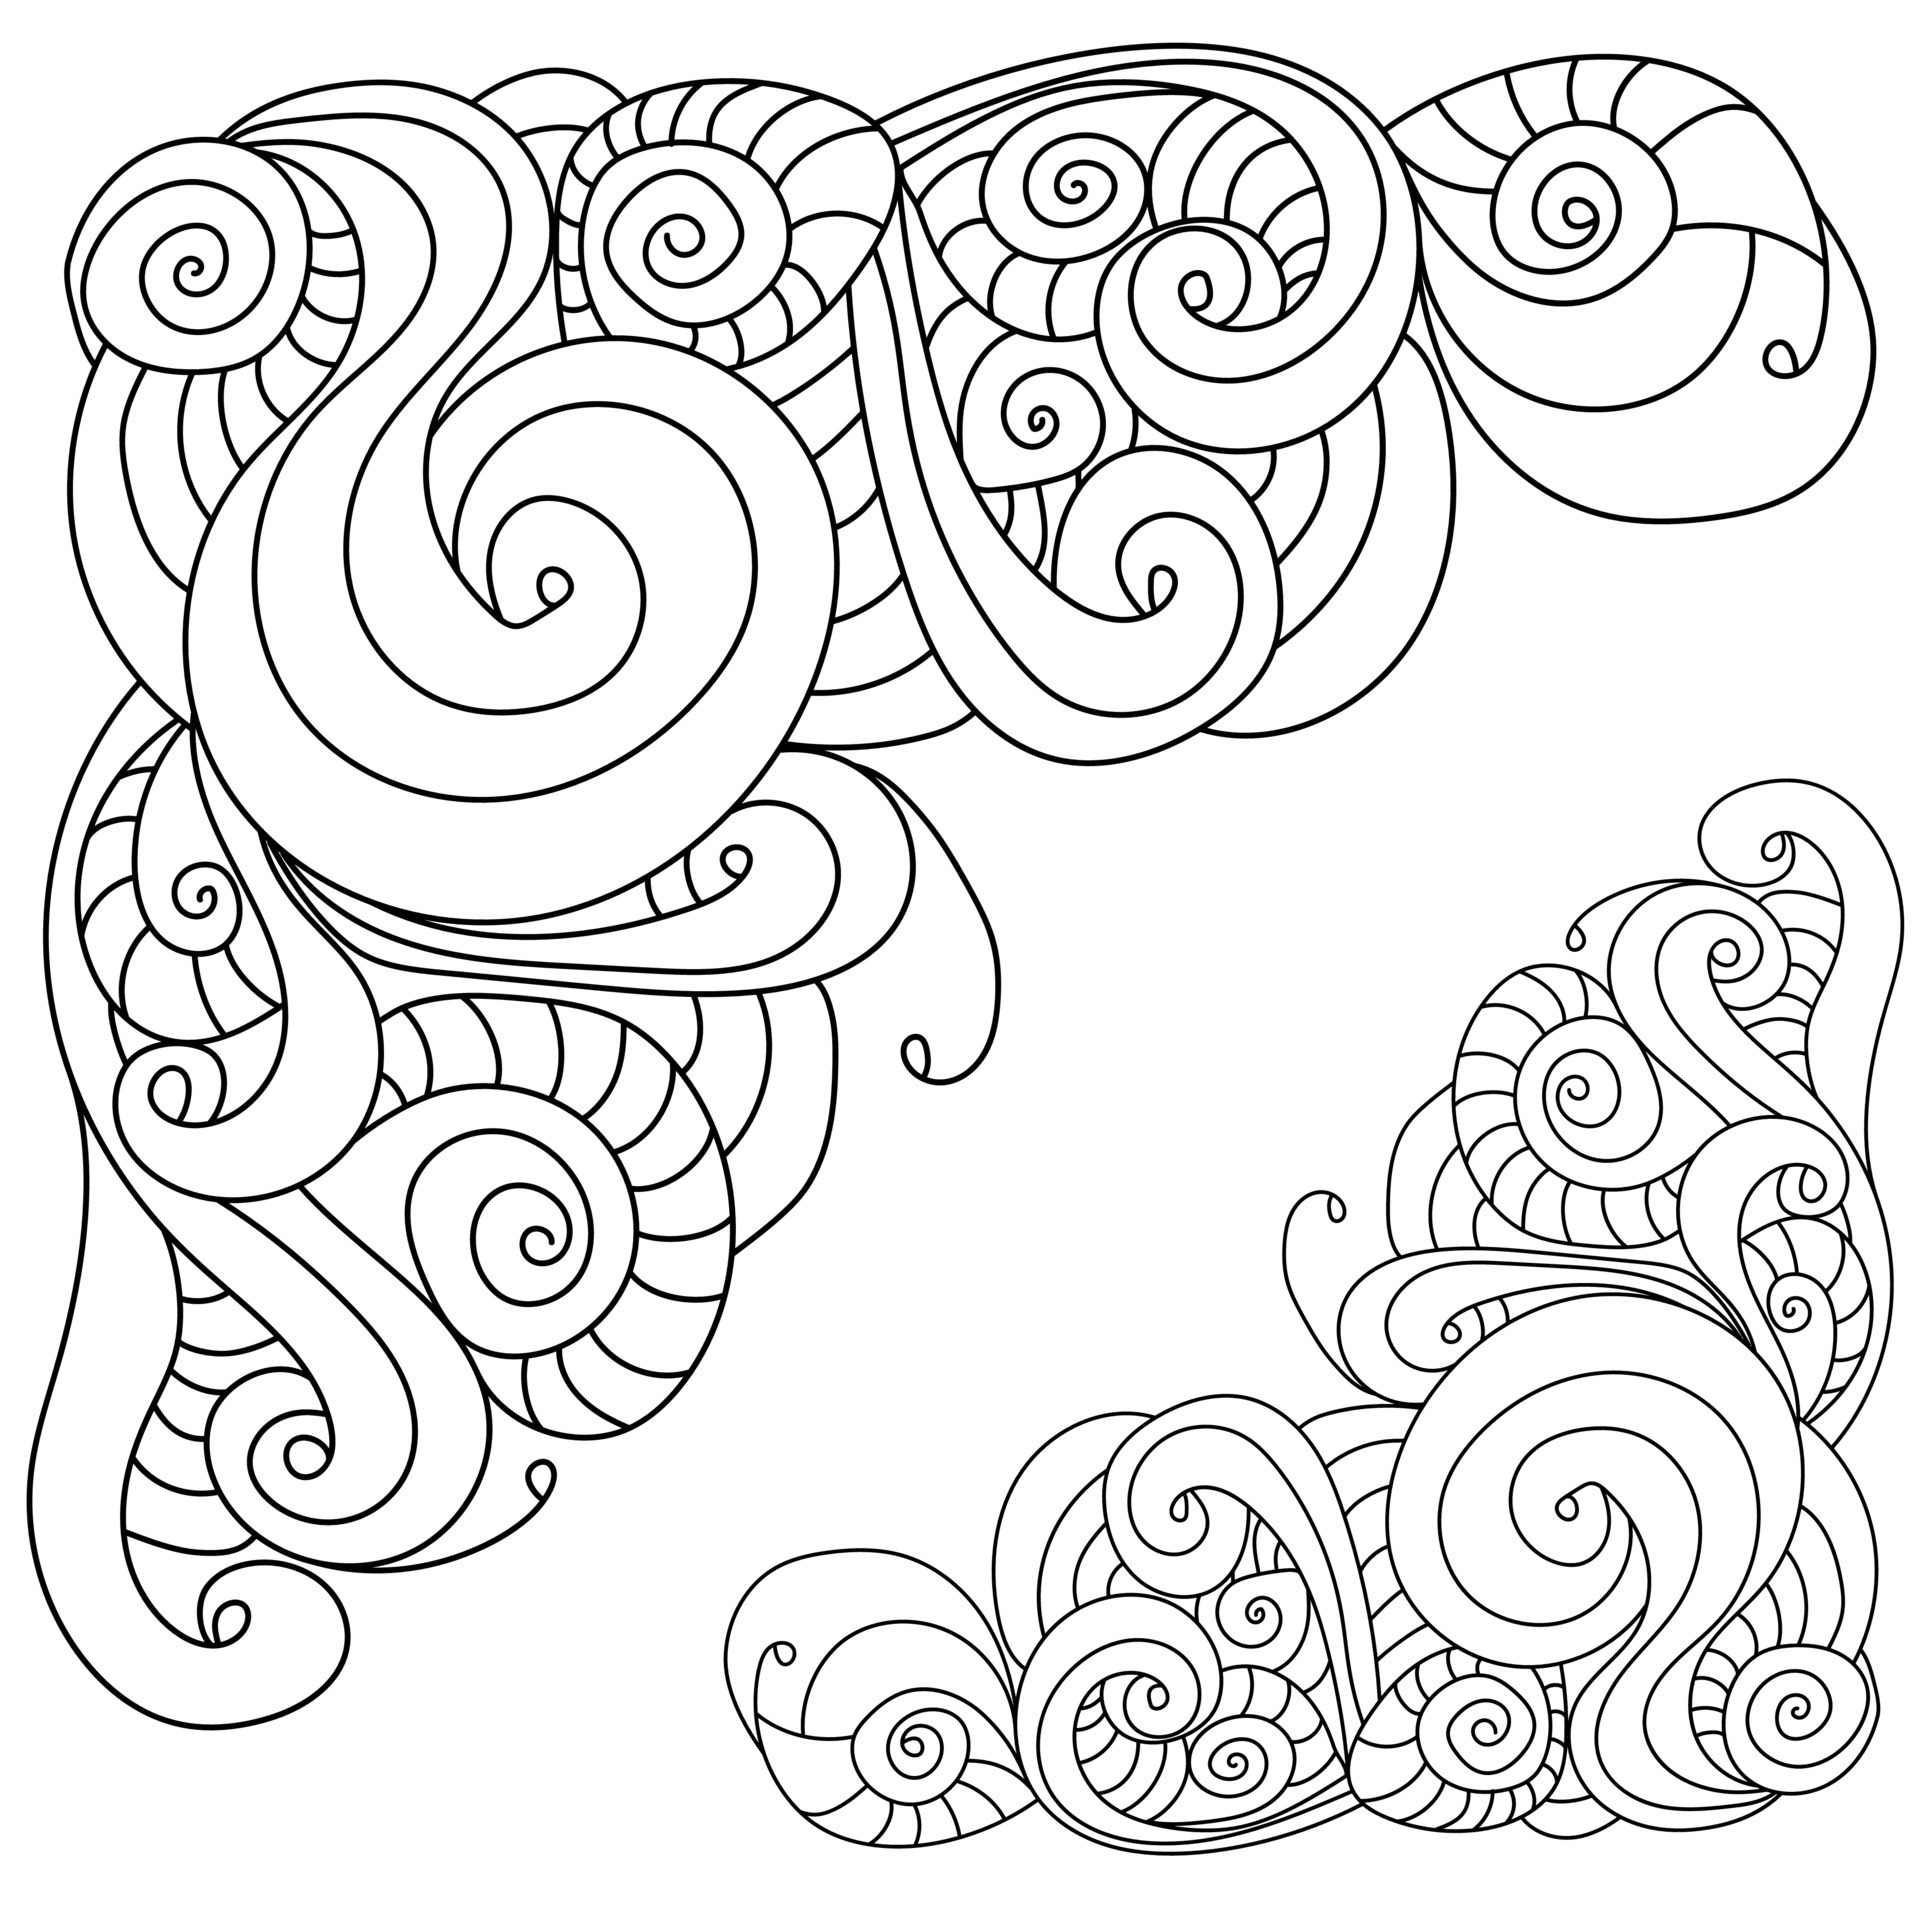 Swirls & Swooshes: Artistic Designs for a Relaxing Coloring